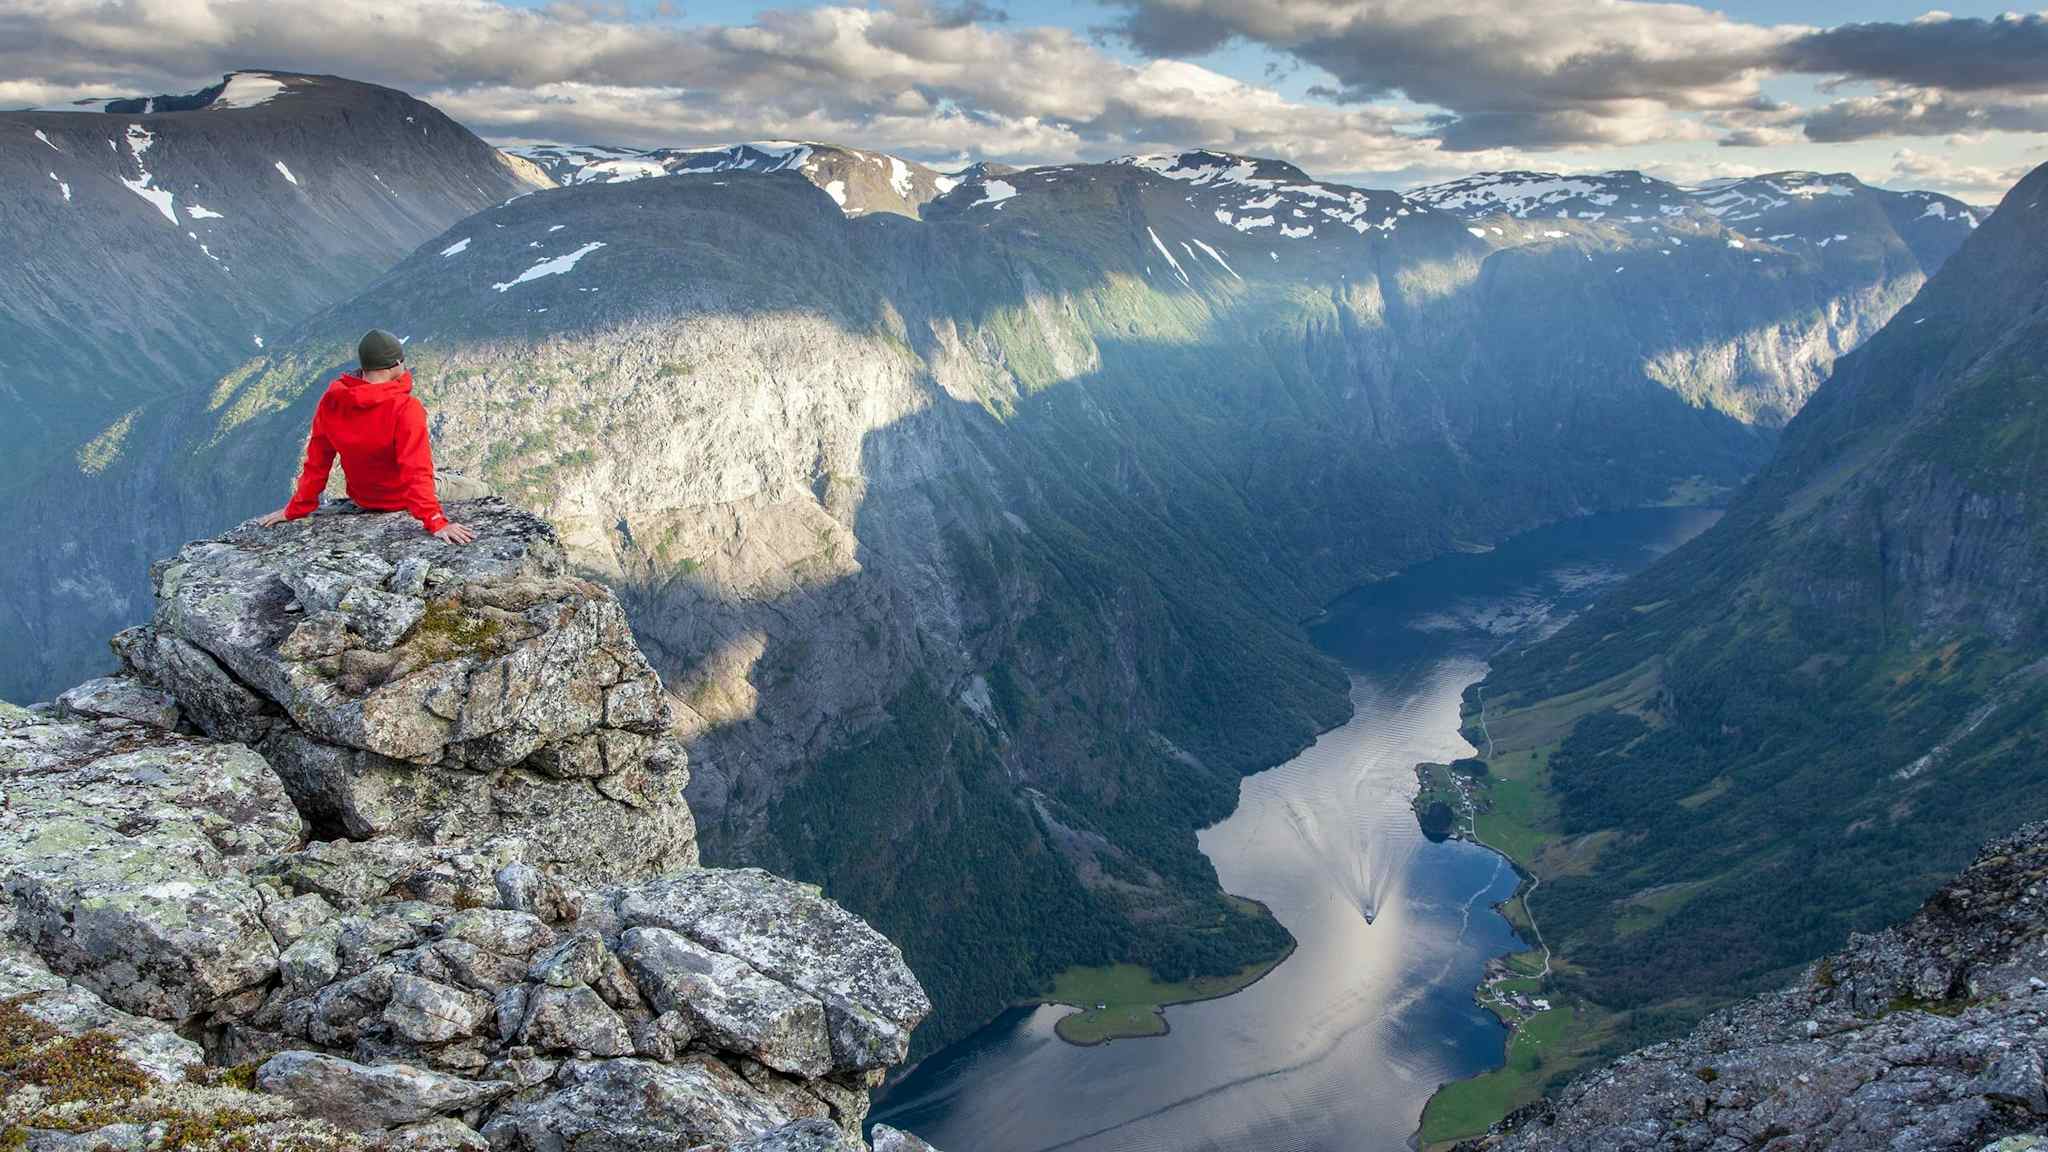 Sitting on a rock overlooking the fjord below